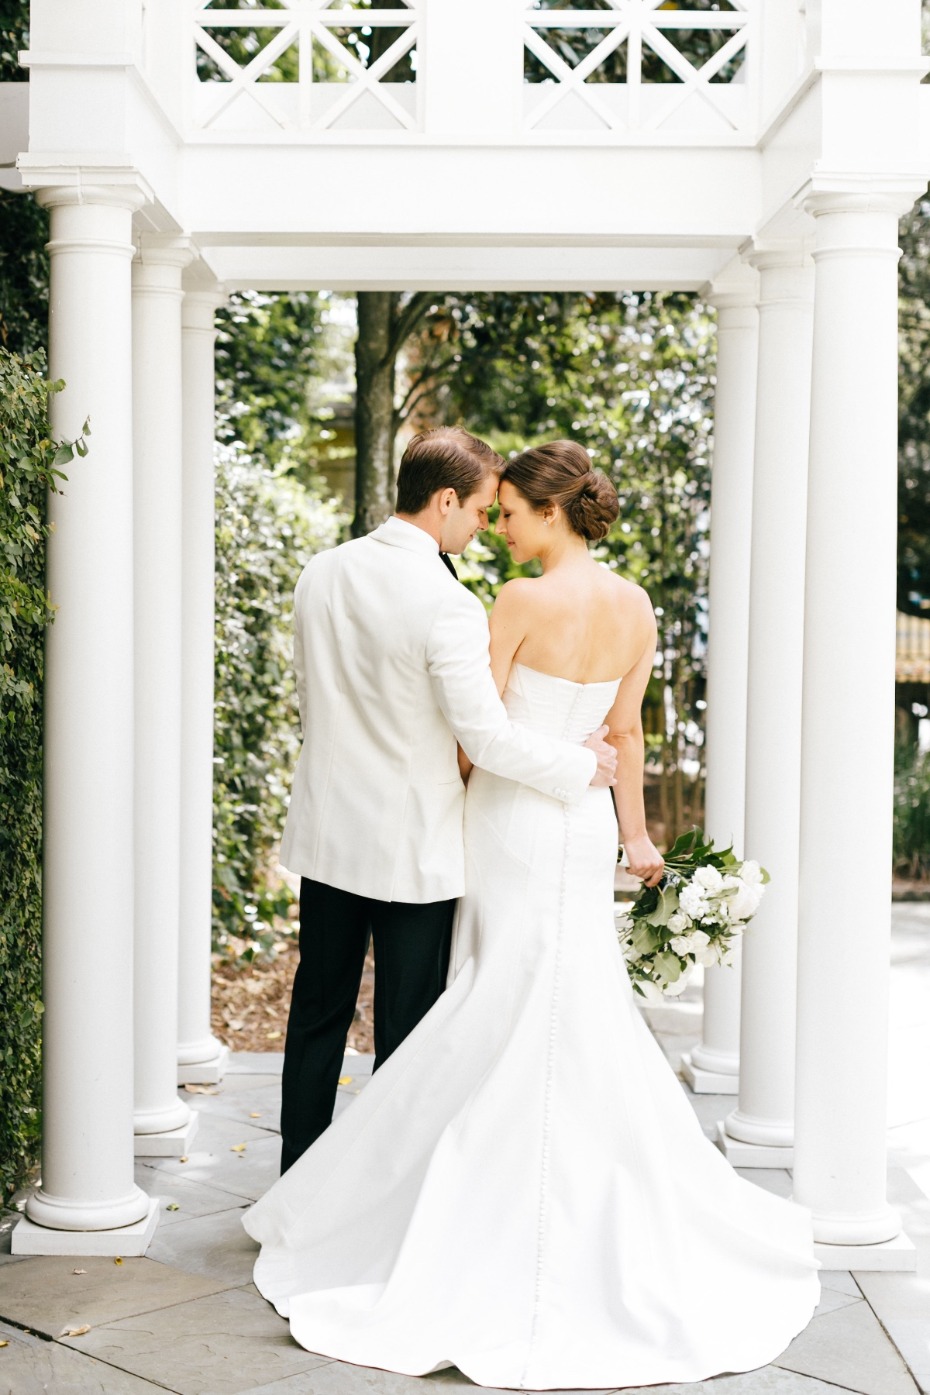 Classic modern black and white wedding with pops of color